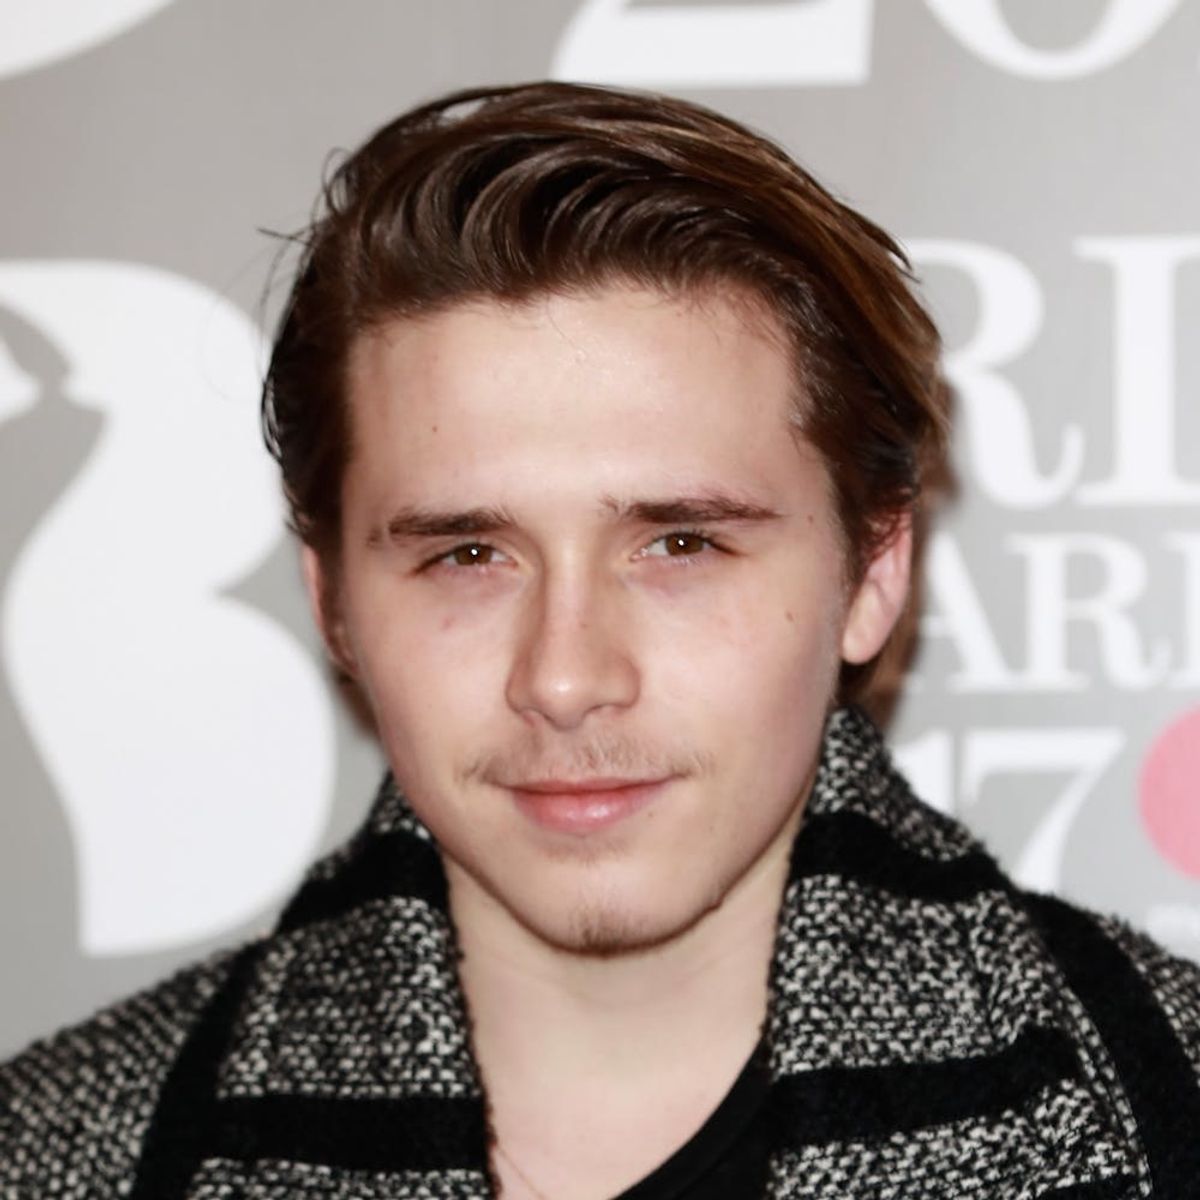 Brooklyn Beckham Has a New Lady and You Just Might Recognize Her